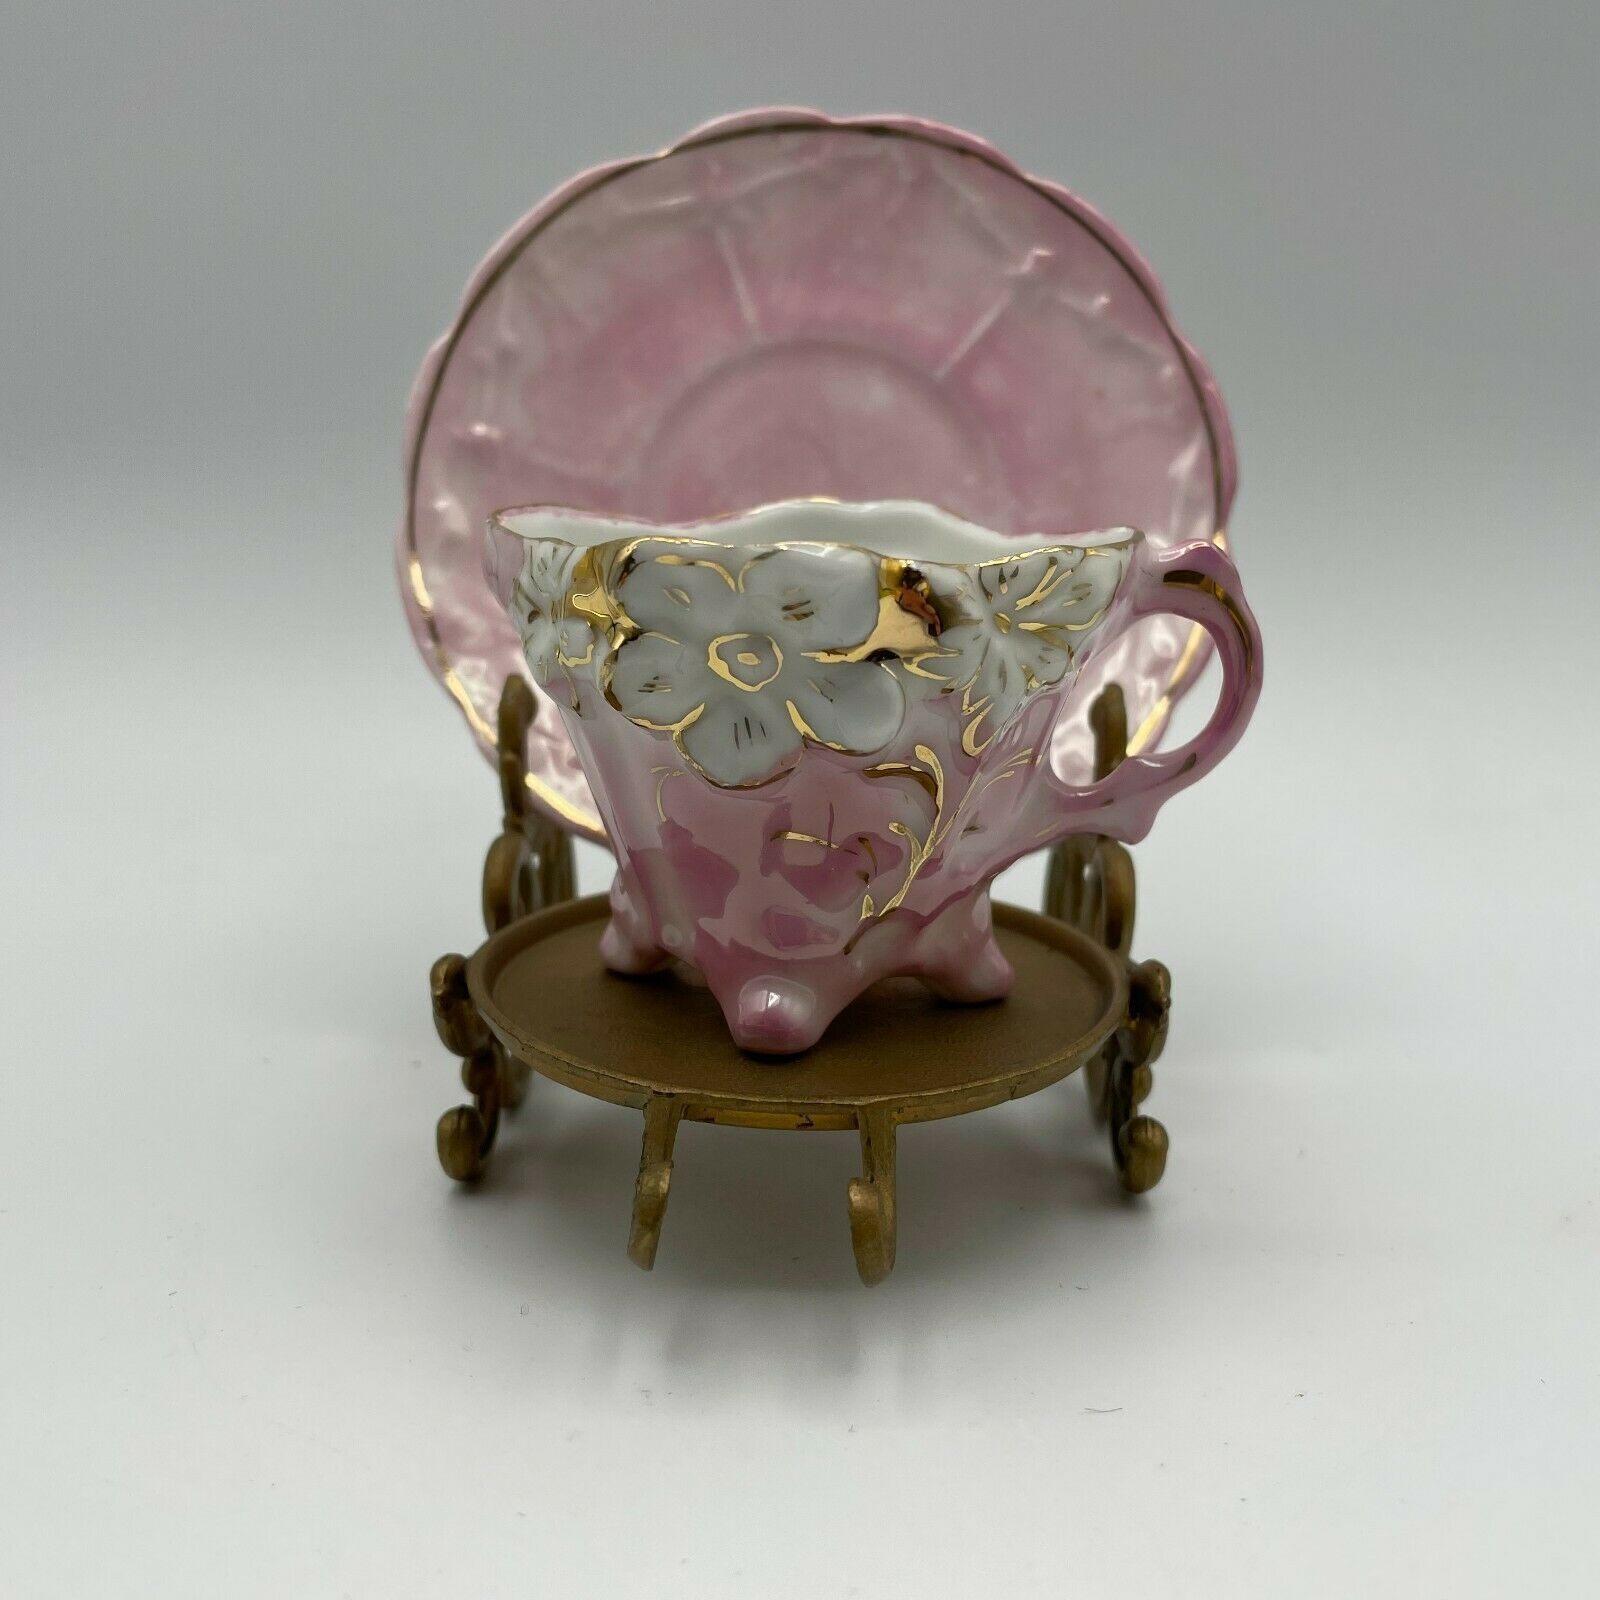 Vintage Victorian Pink and Gold Cup & Saucer